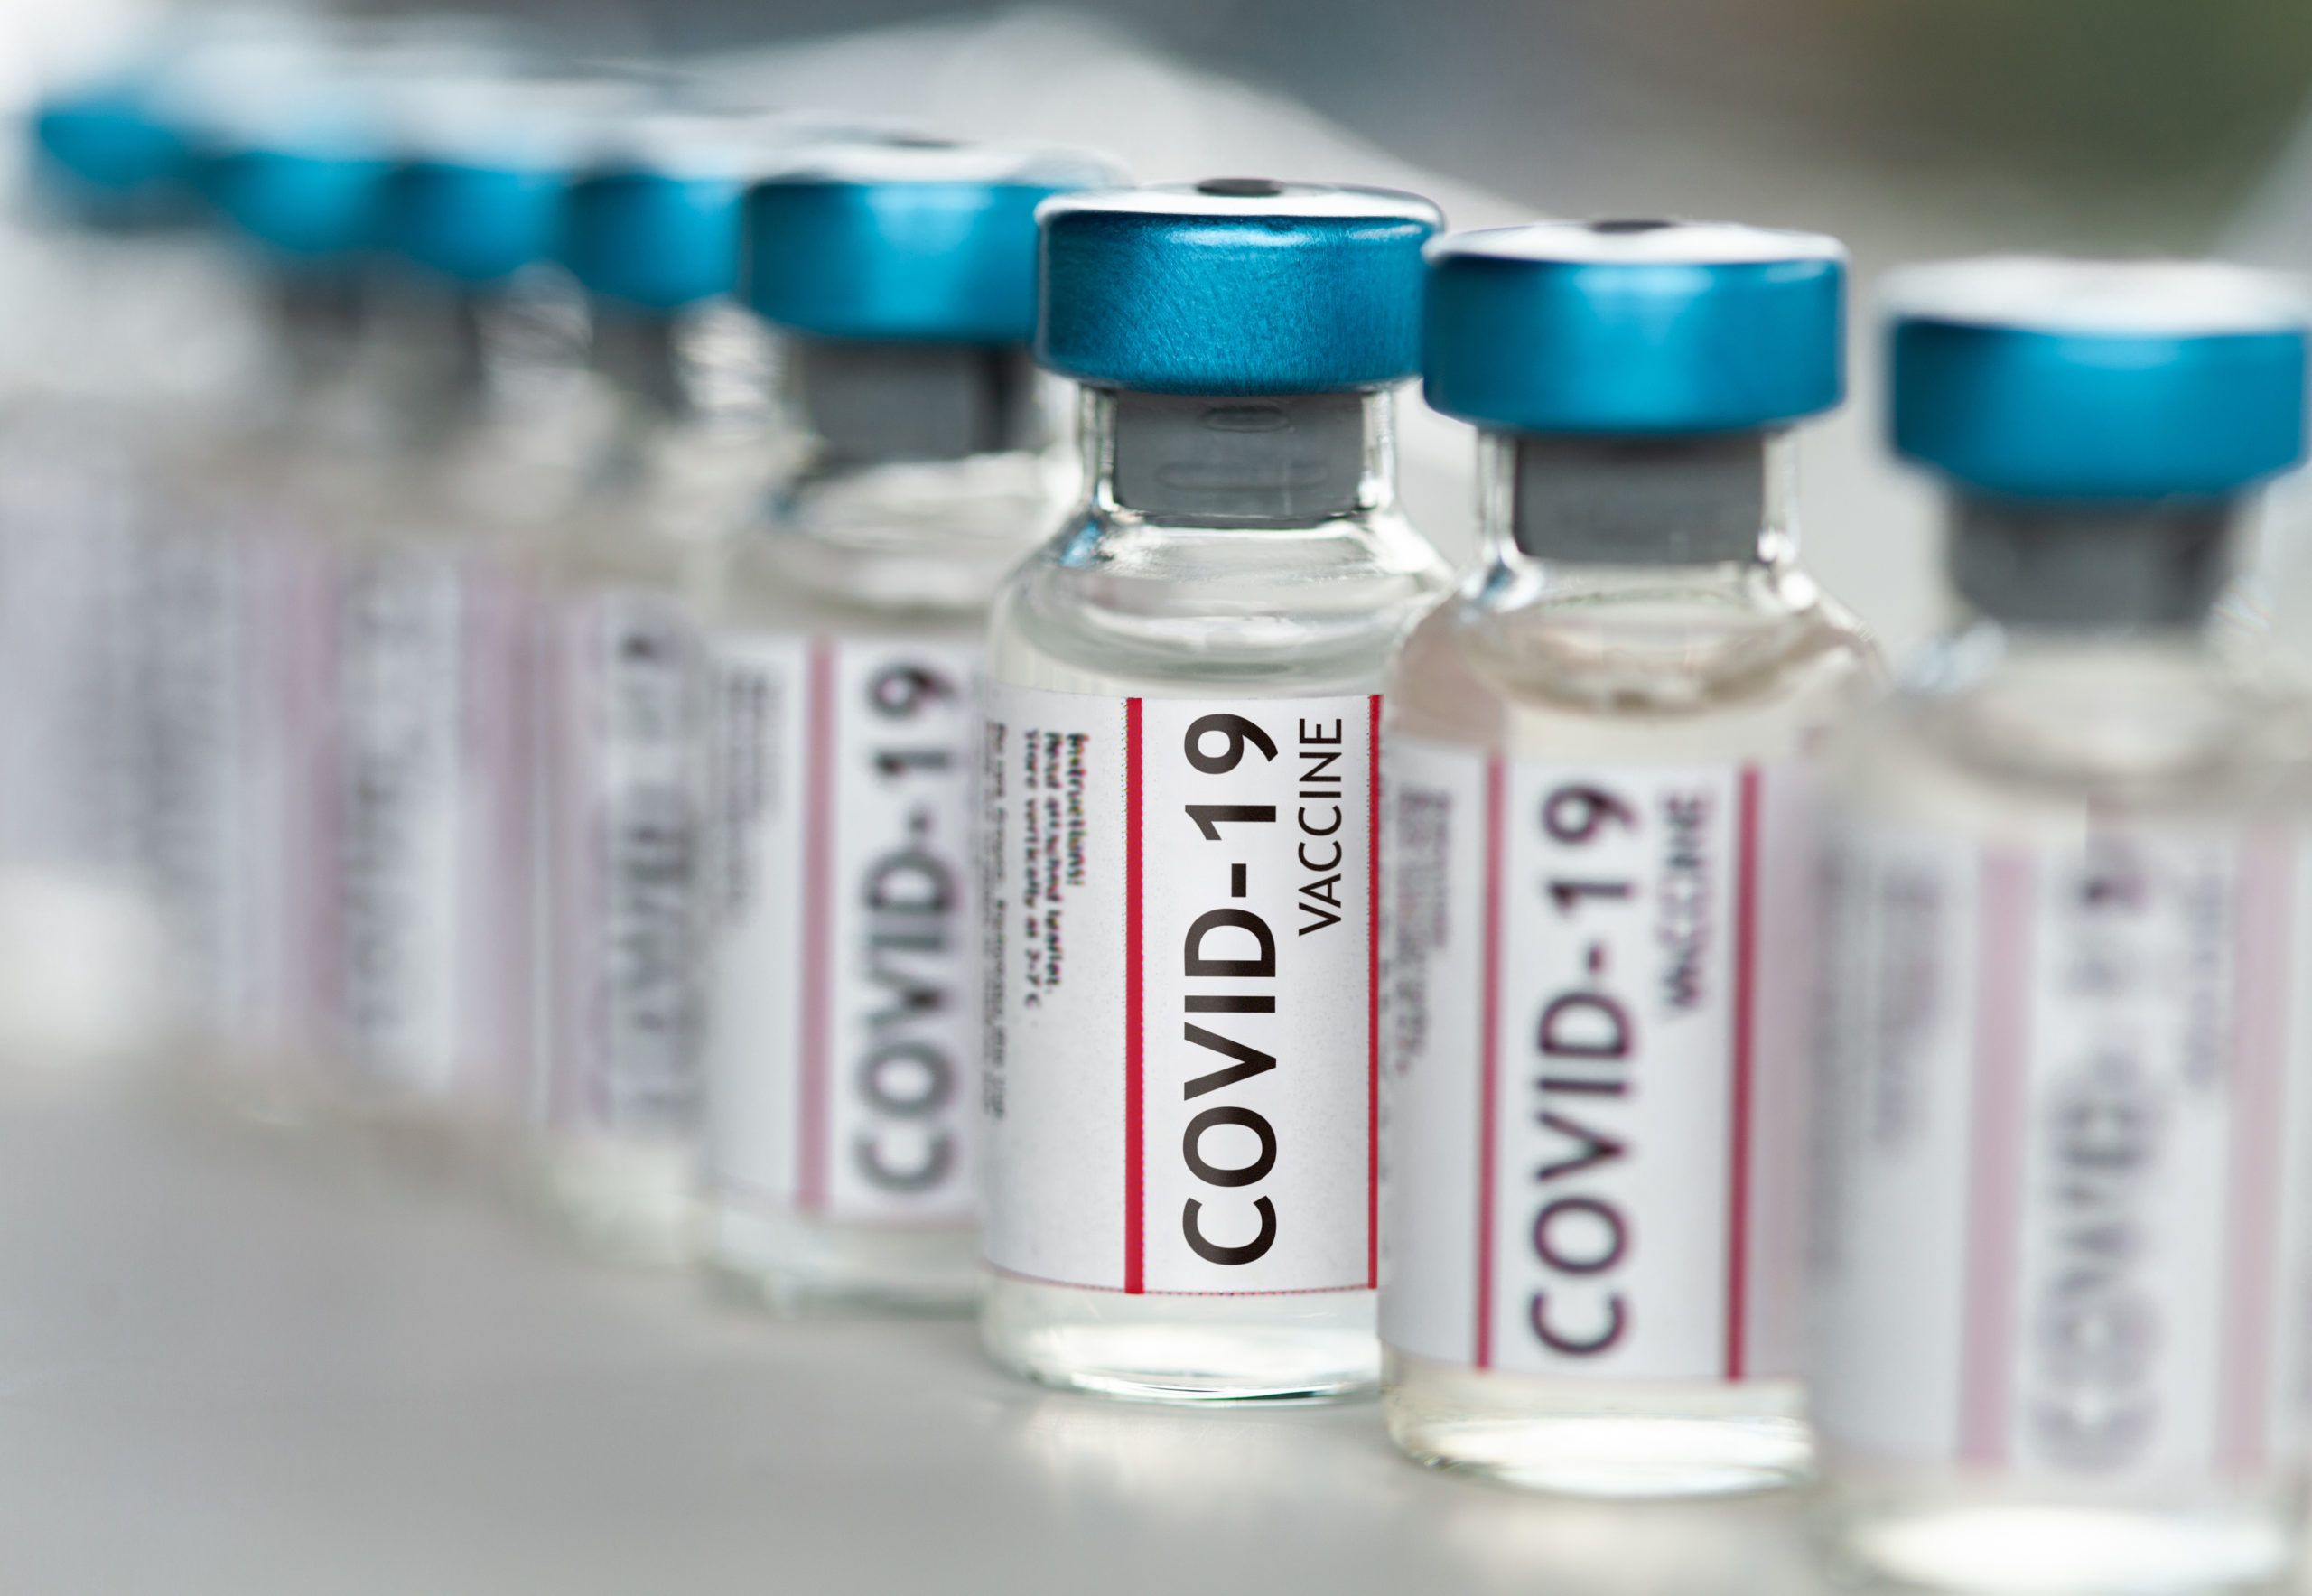 covid vaccine for us travel